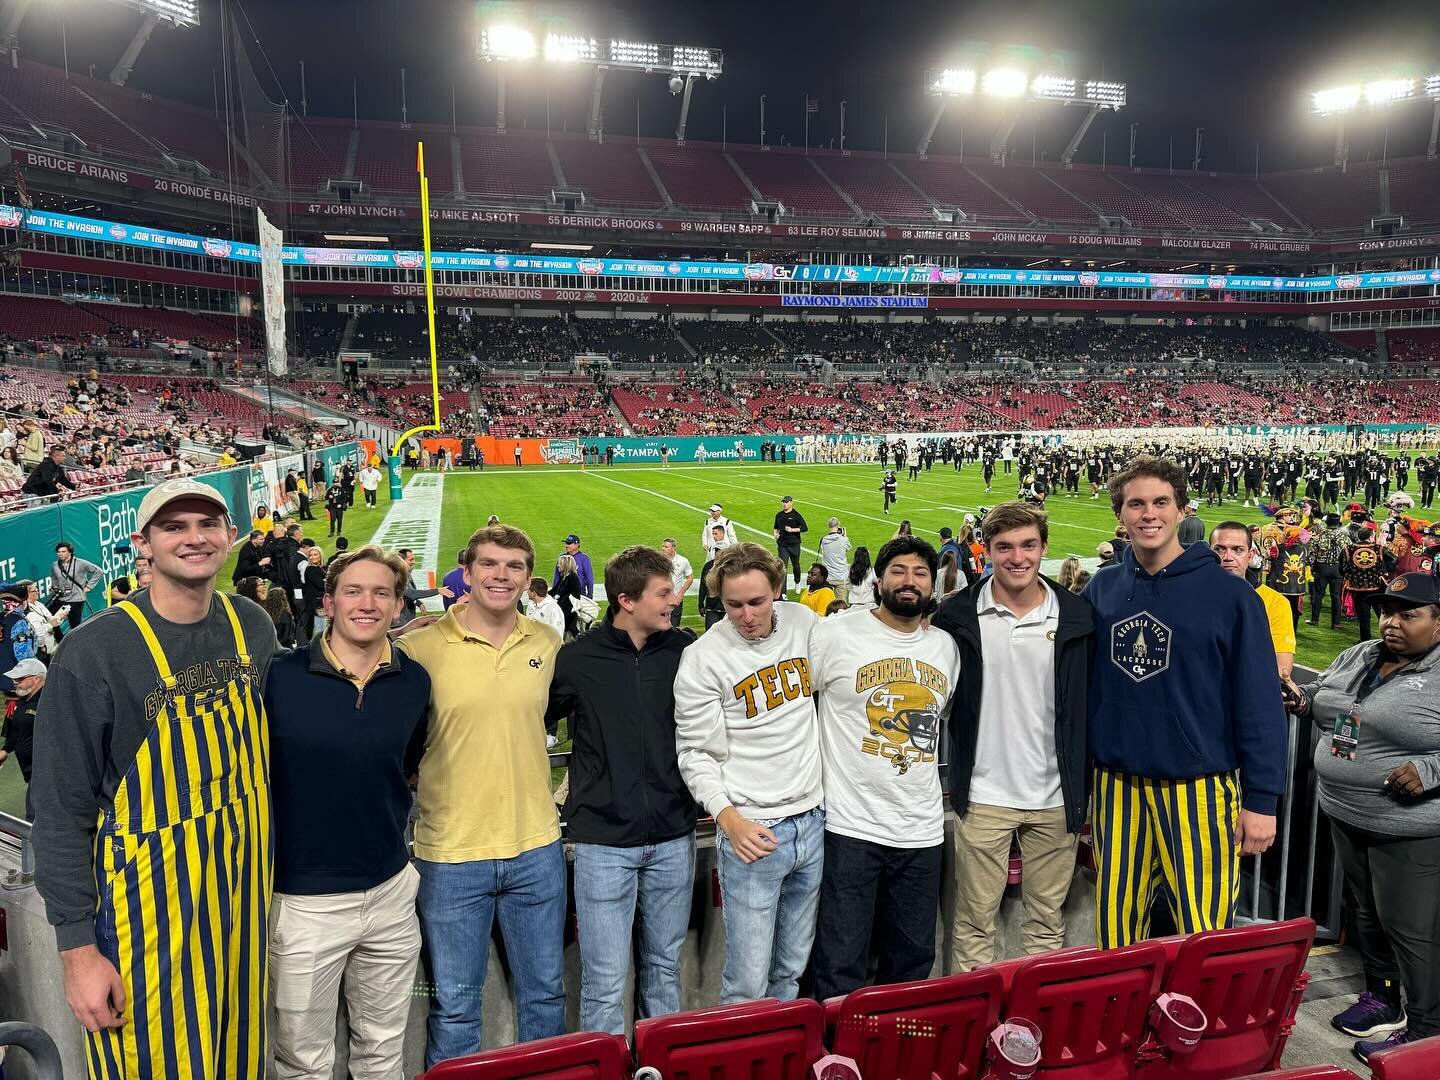 As the Spring Semester kicks off, here are some of the Beta Brothers Abroad this past break 🌎

Brothers Scott Williamson, Caleb Yarbrough, Charles McNabb, Hayden Rieder, Jack Godfrey, Aazan Khan, Tommy Edelmann, and Curran Myers traveled to Tampa to